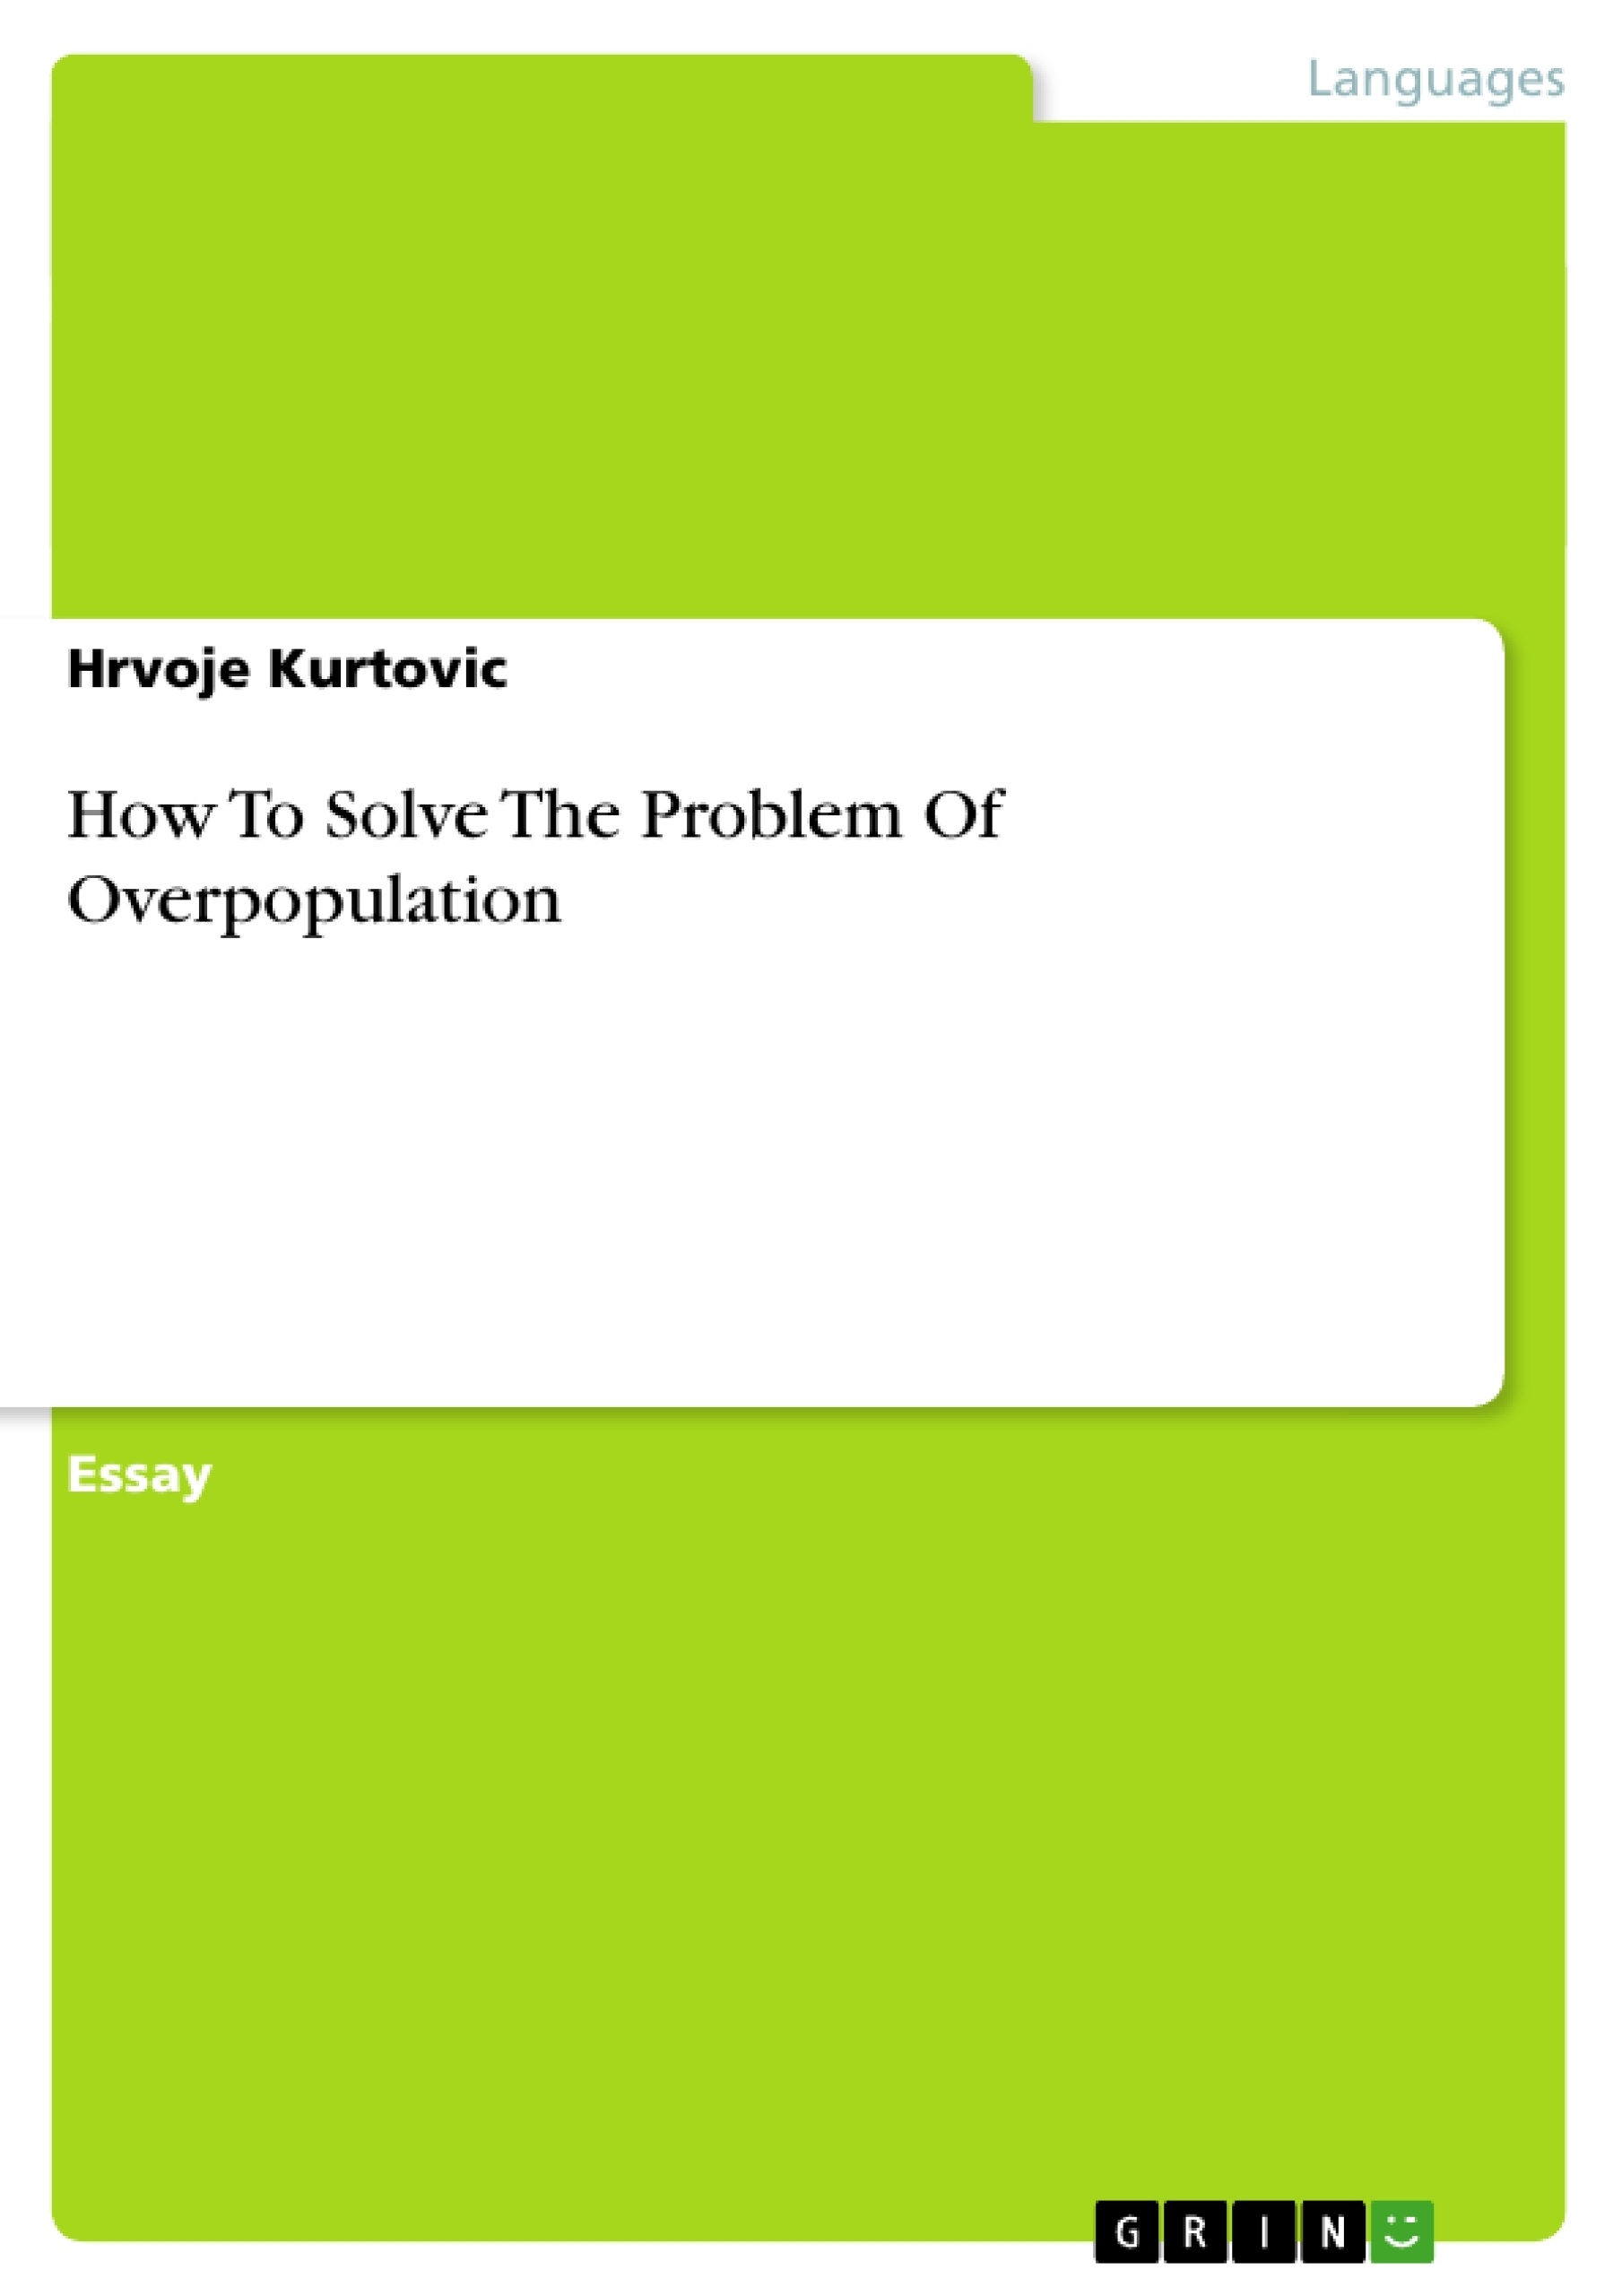 Title: How To Solve The Problem Of Overpopulation